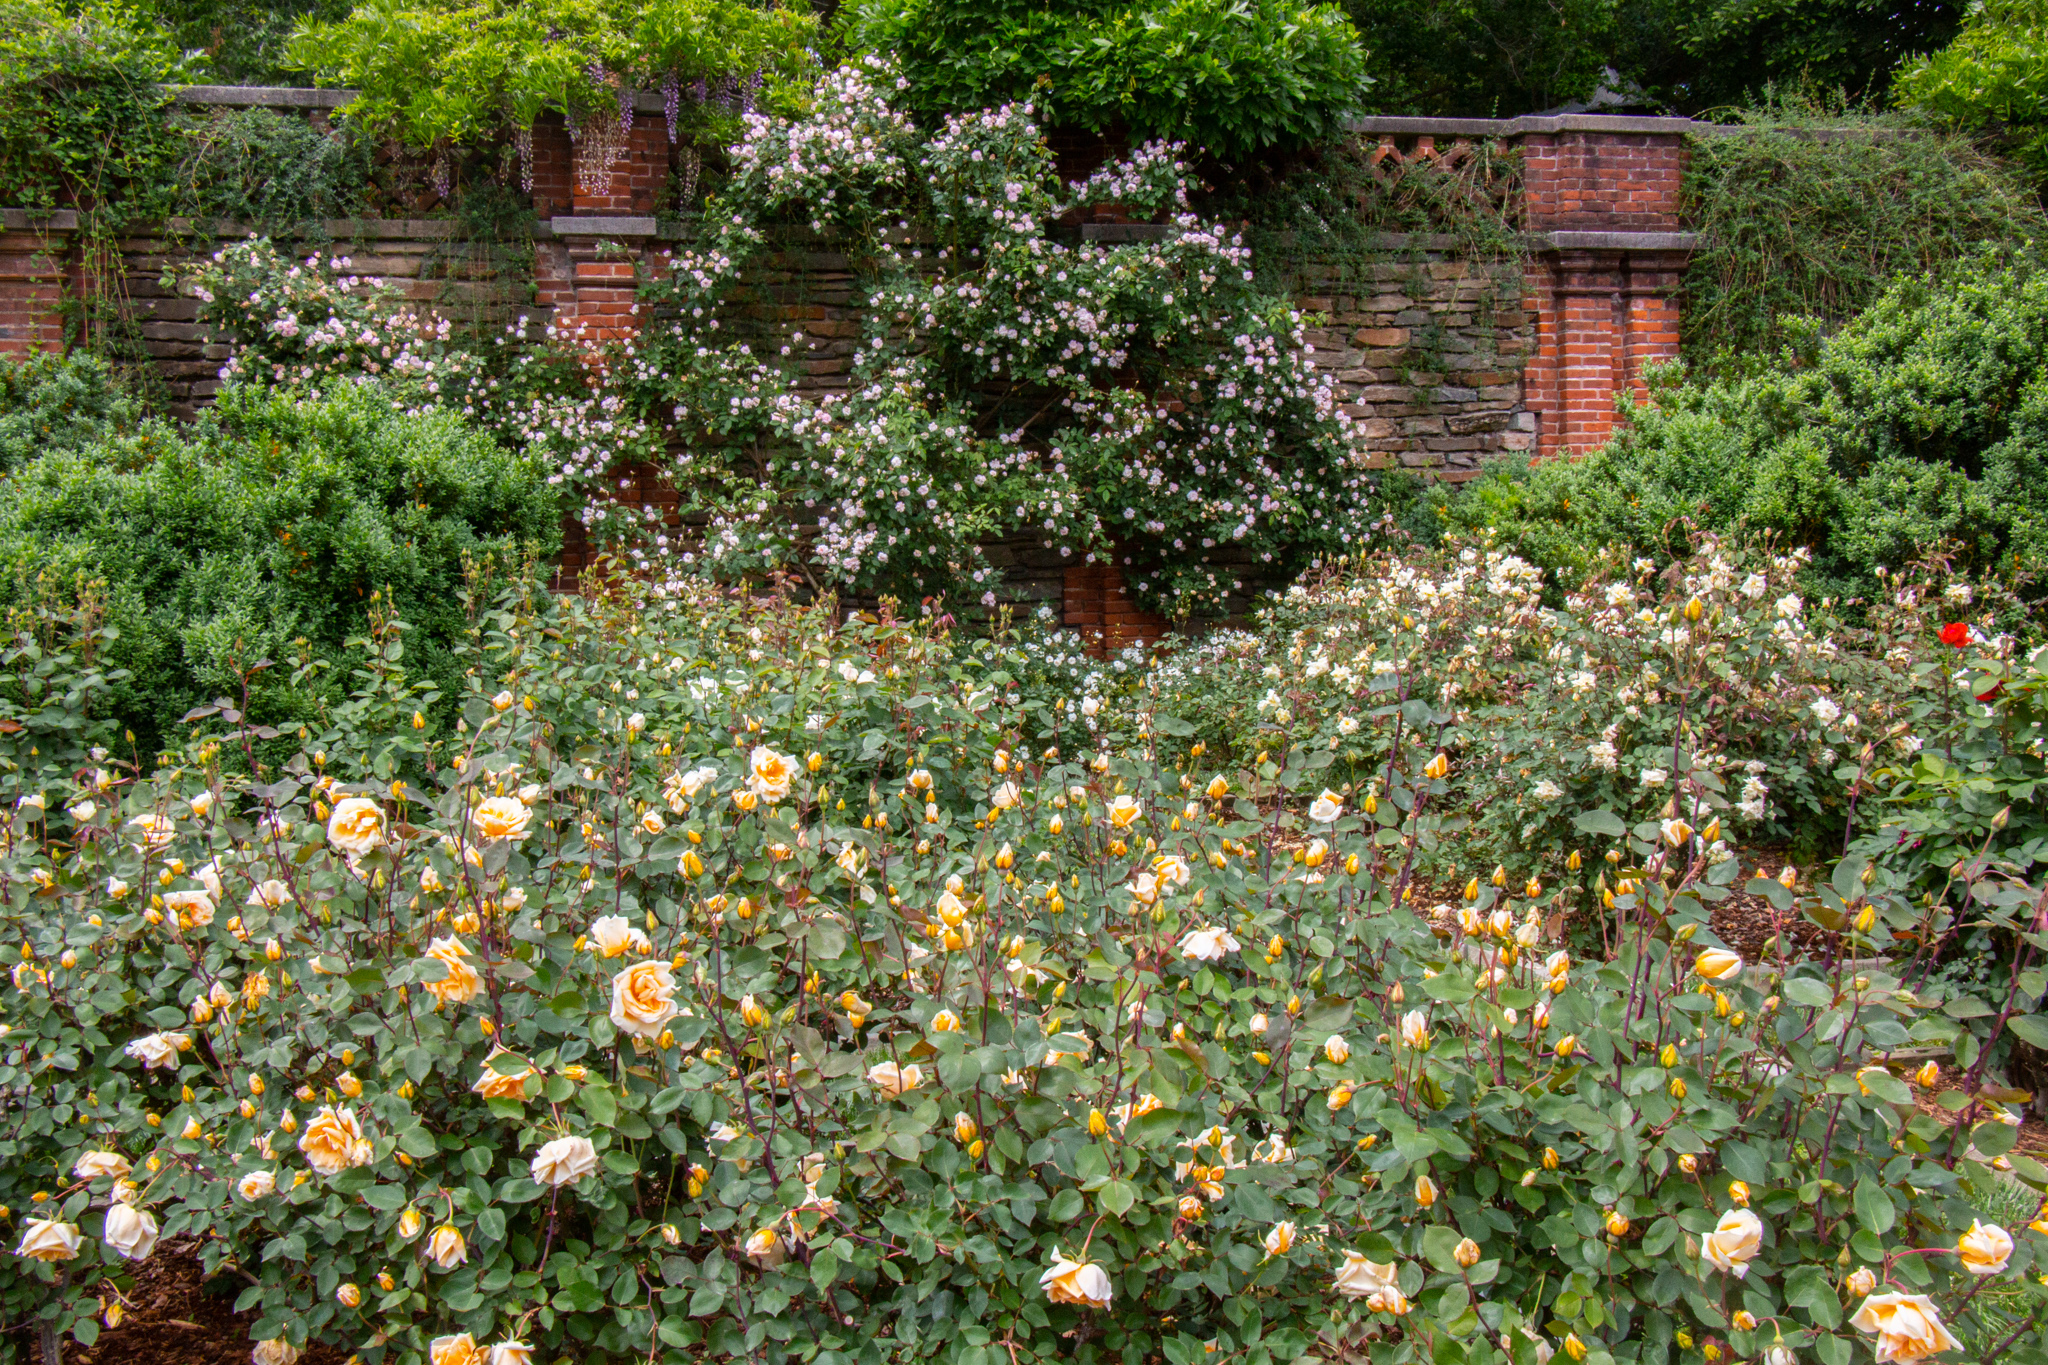 The rosebushes are cut back significantly during dormancy to encourage the growth of new canes, where the roses will bloom.